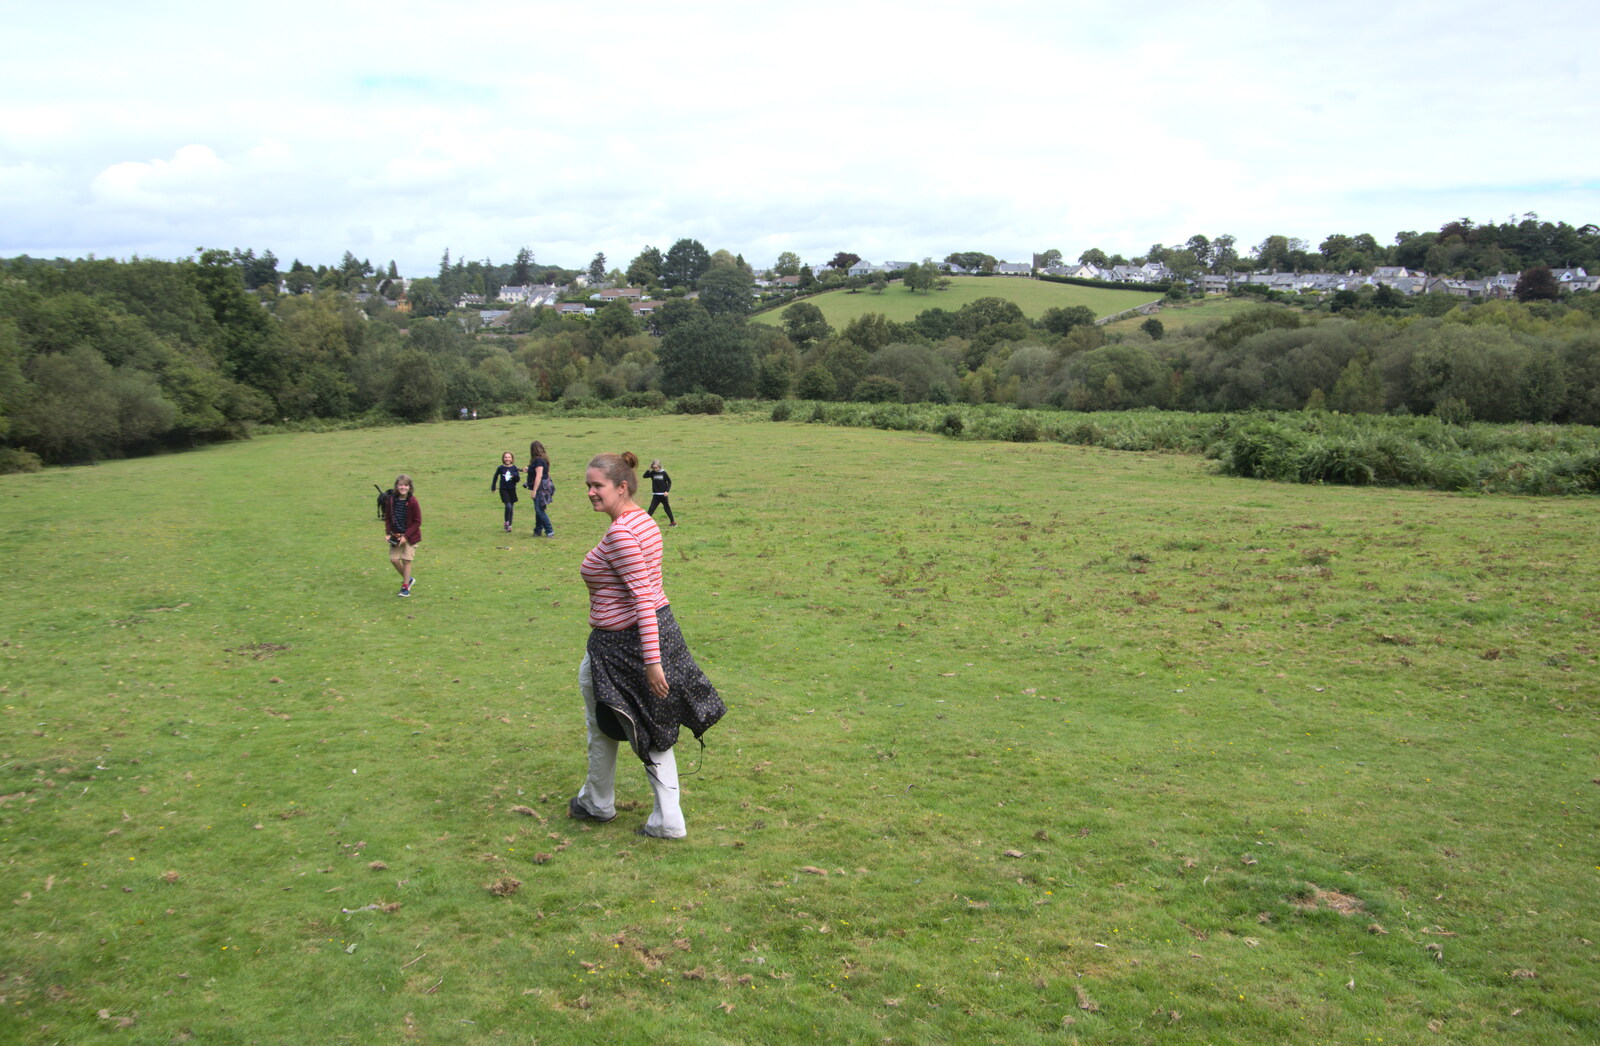 Roaming around from A Game of Cricket, and a Walk Around Chagford, Devon - 23rd August 2020